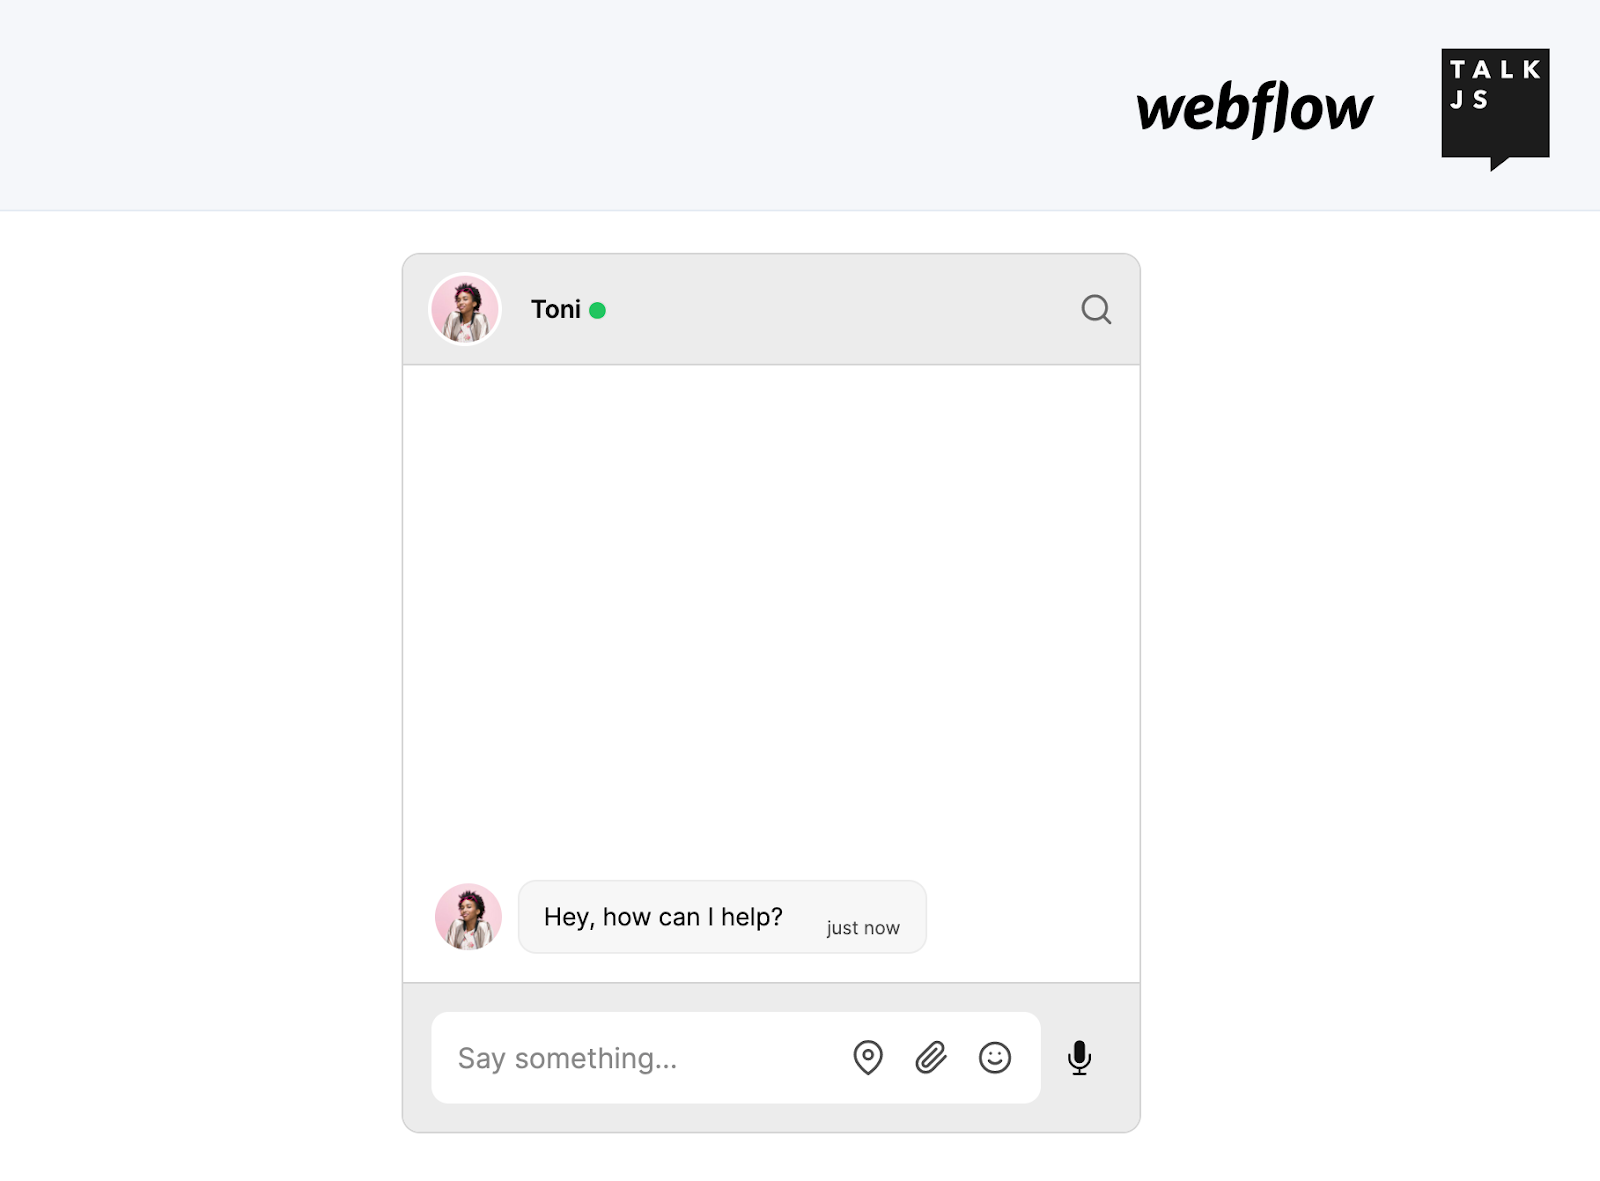 Integrate chat into a Webflow site with TalkJS